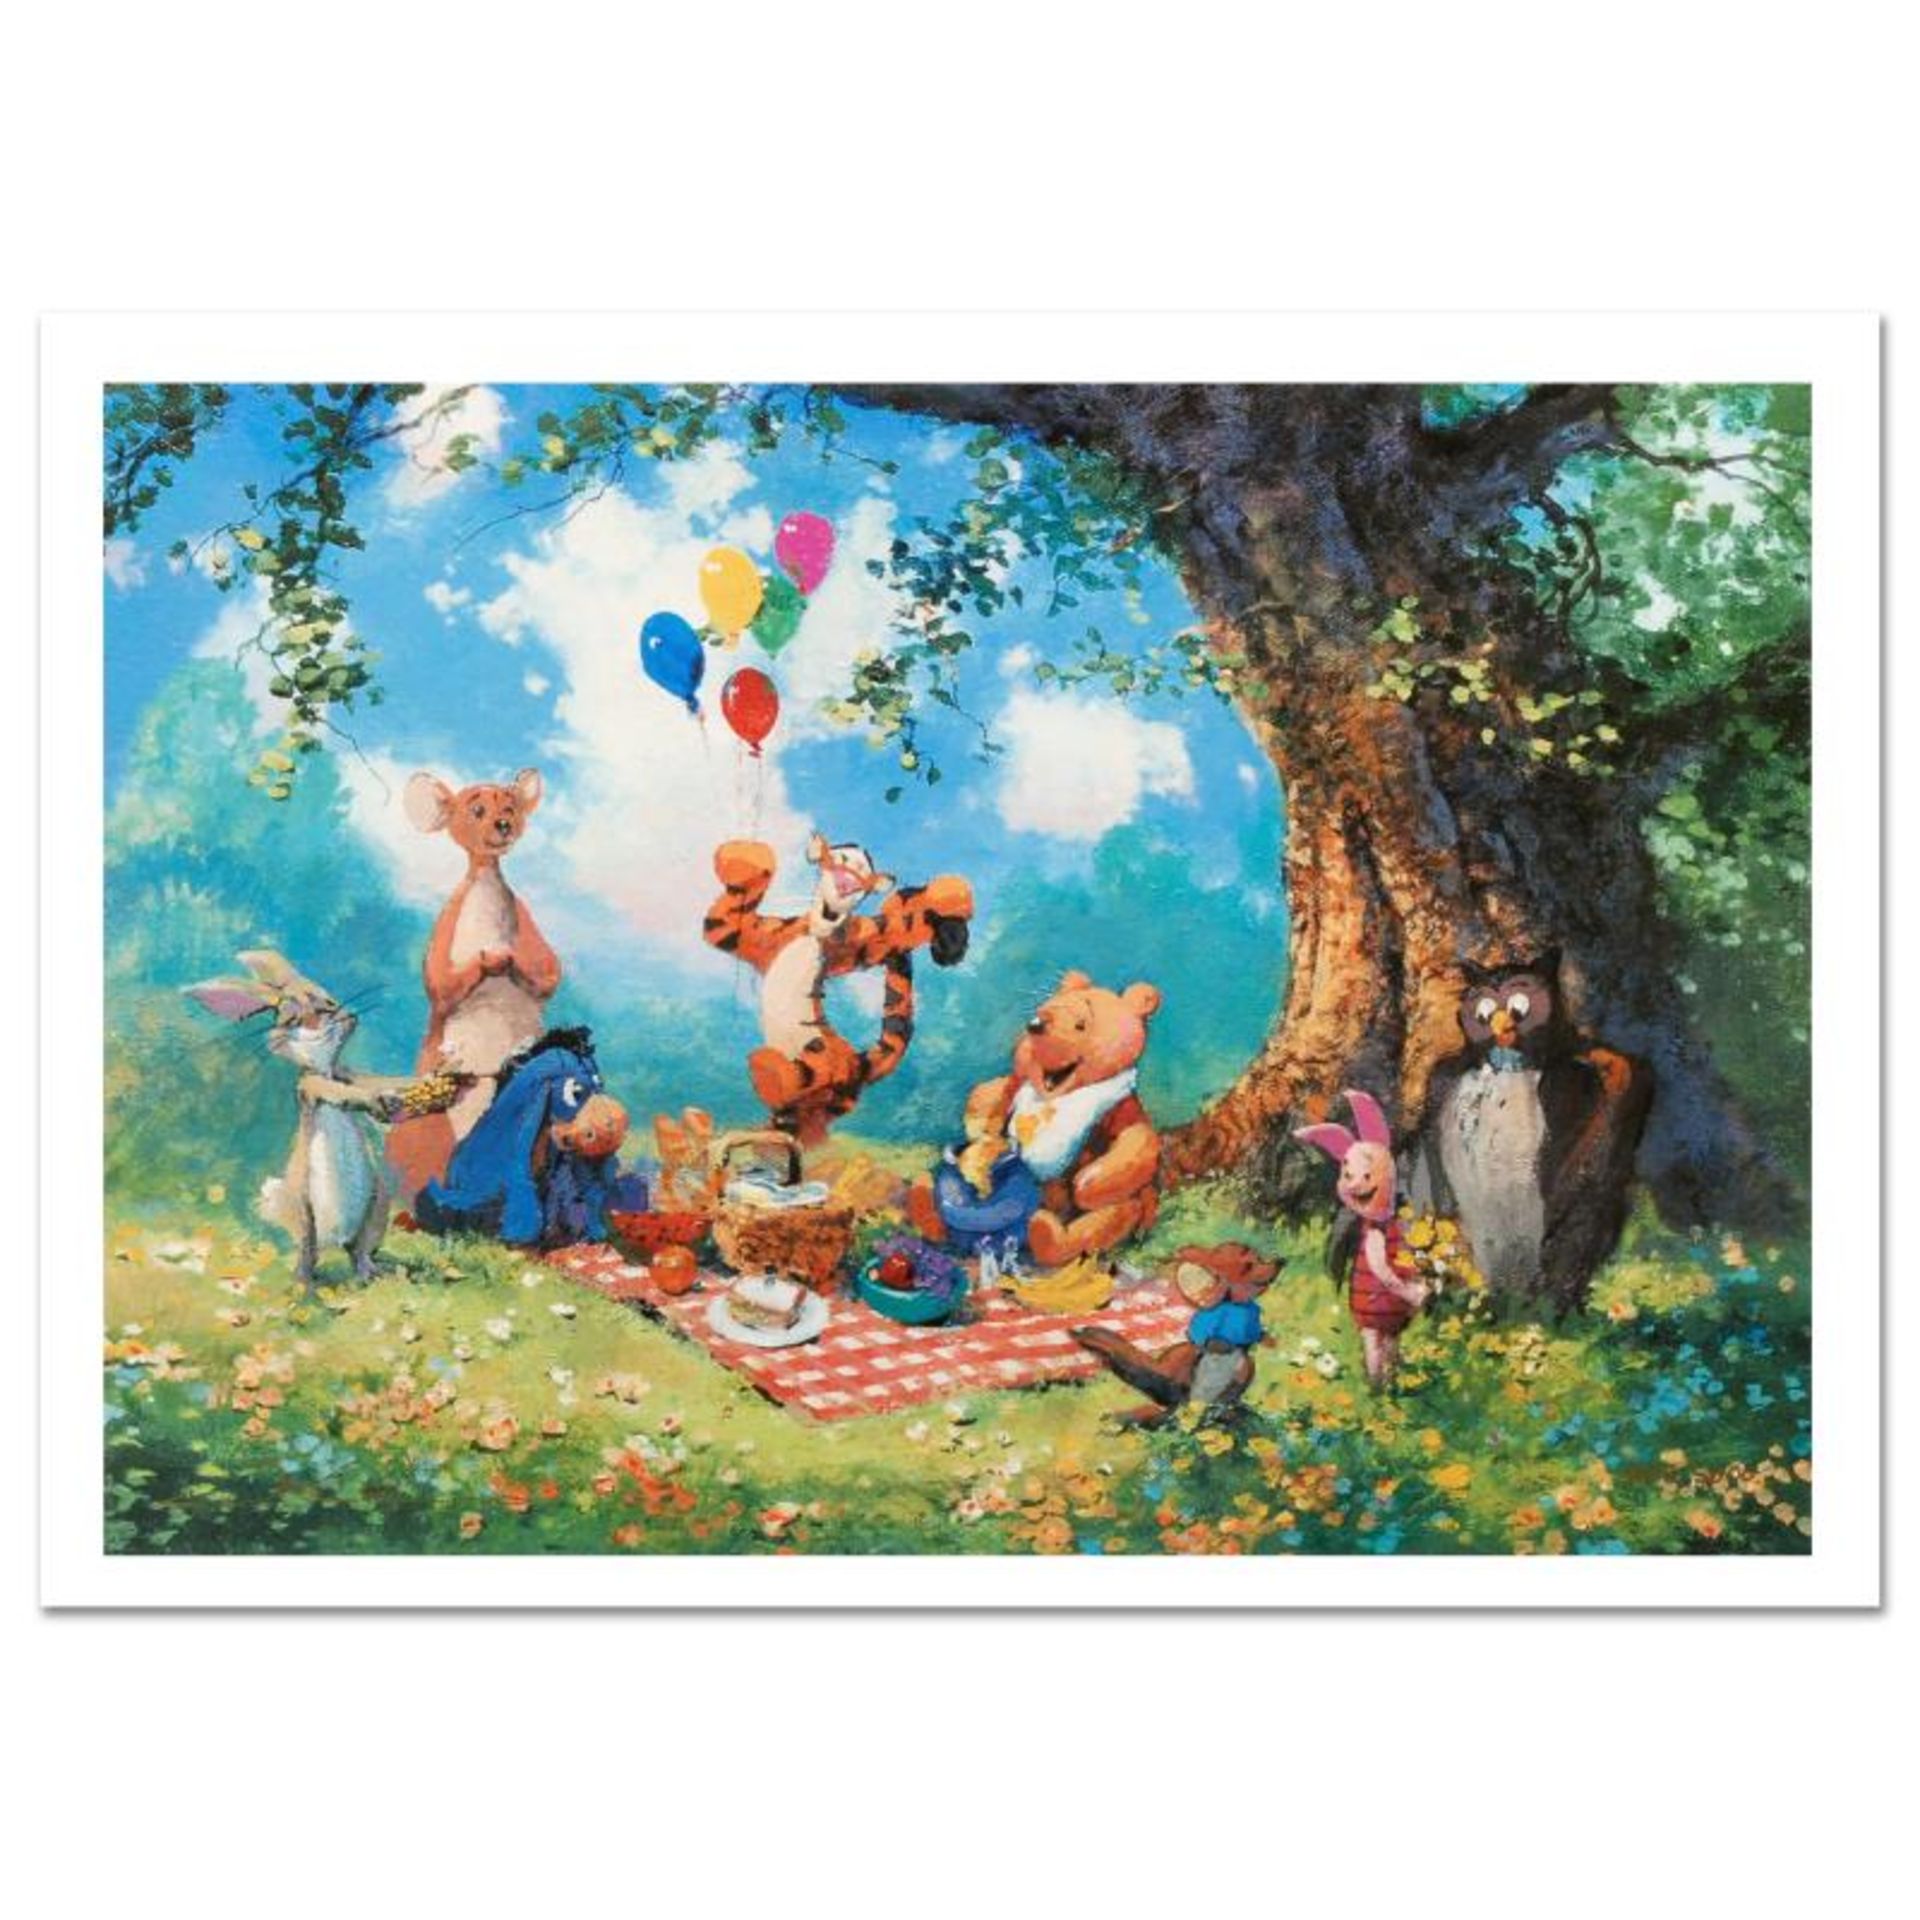 "Splendiferous Picnic" Limited Edition Lithograph by James Coleman, Numbered and